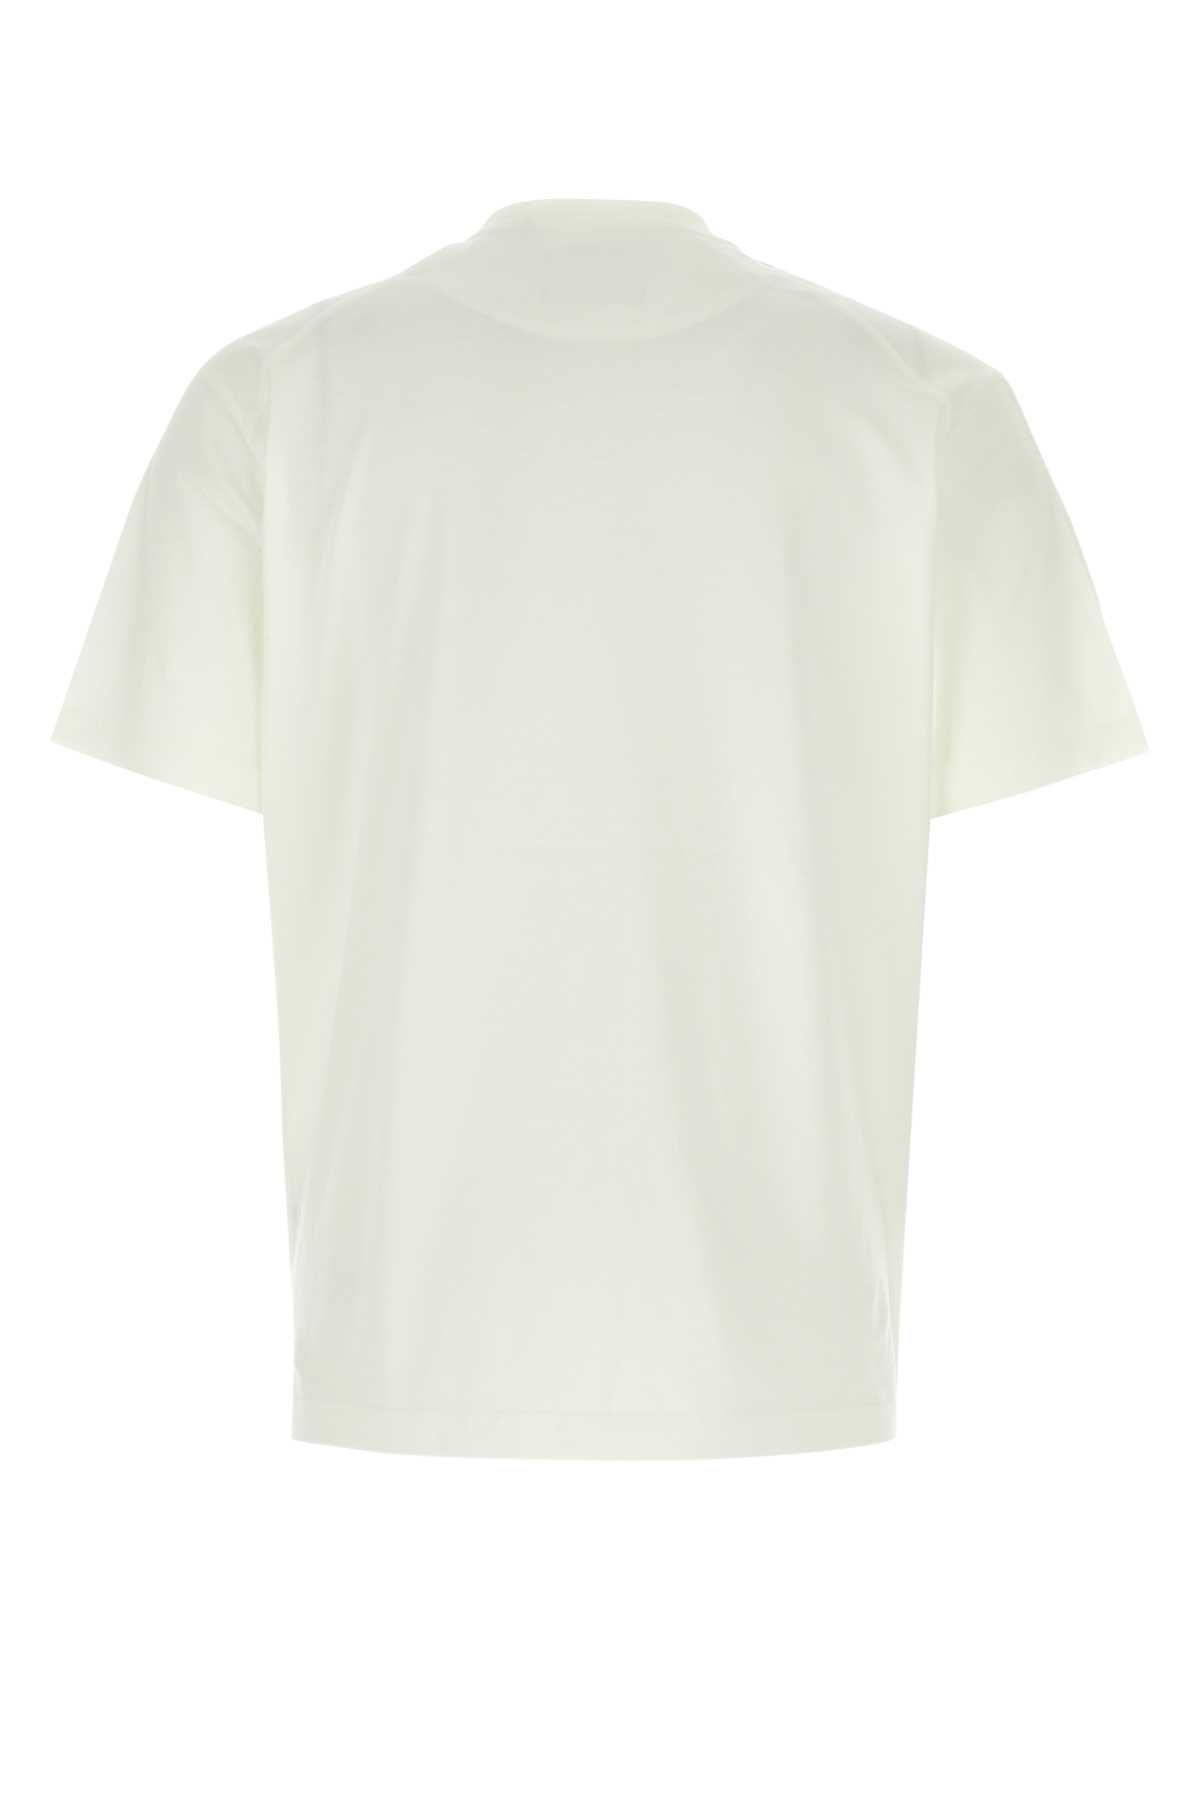 Y-3 Ivory Cotton T-shirt In Owhite